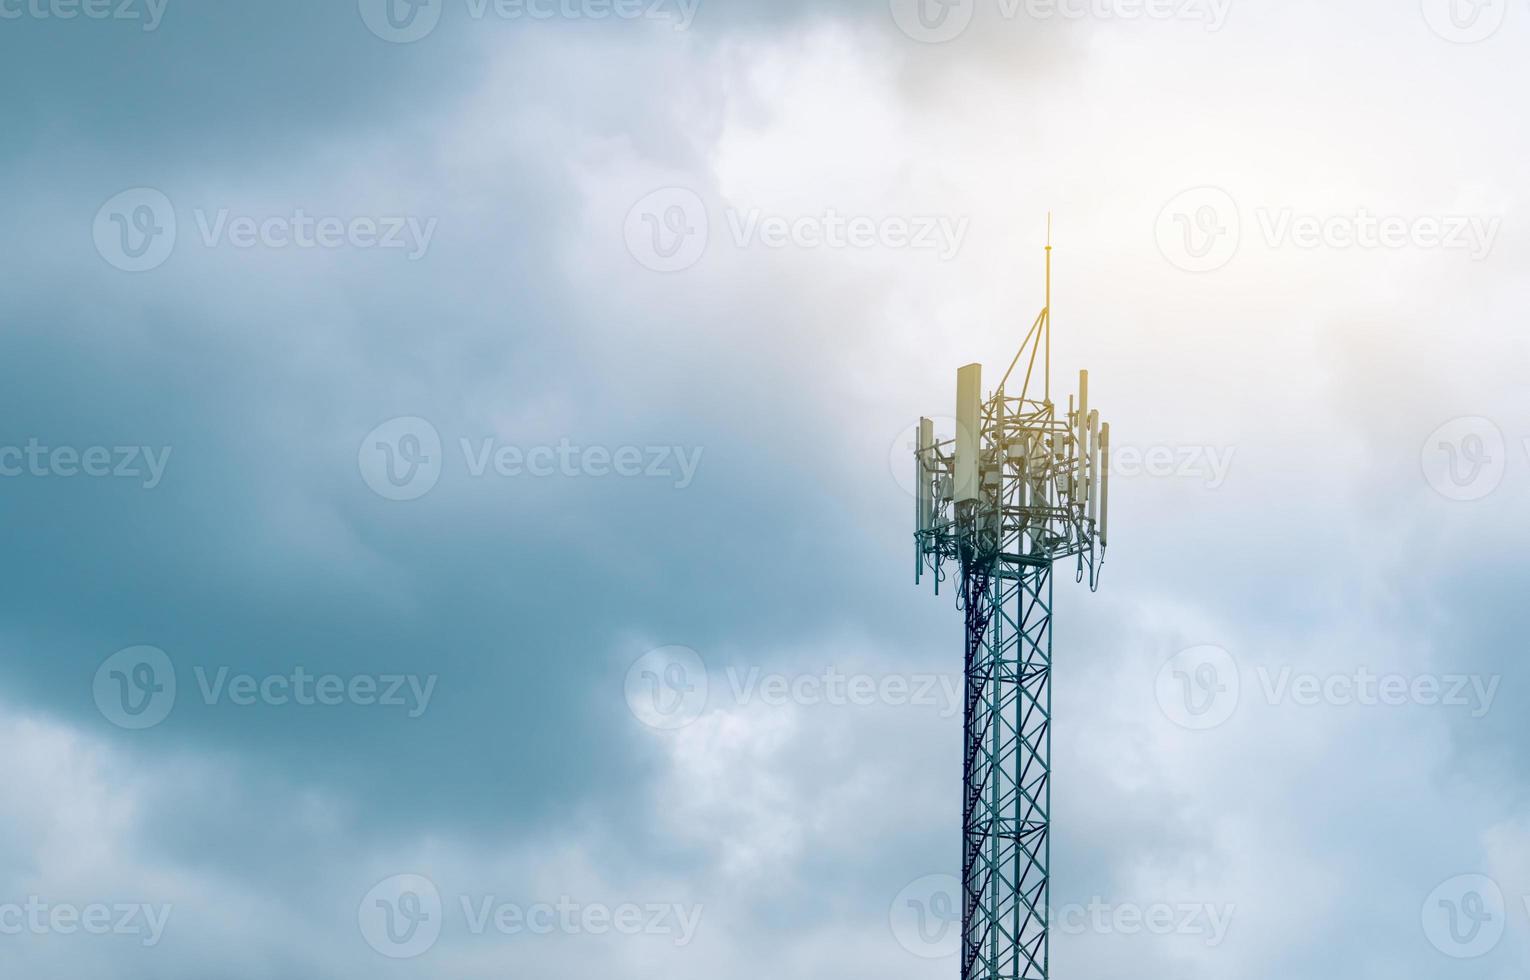 Telecommunication tower with cloudy sky background. Antenna on blue sky. Radio and satellite pole. Communication technology. Telecommunication industry. Mobile or telecom 5g network. Technology photo